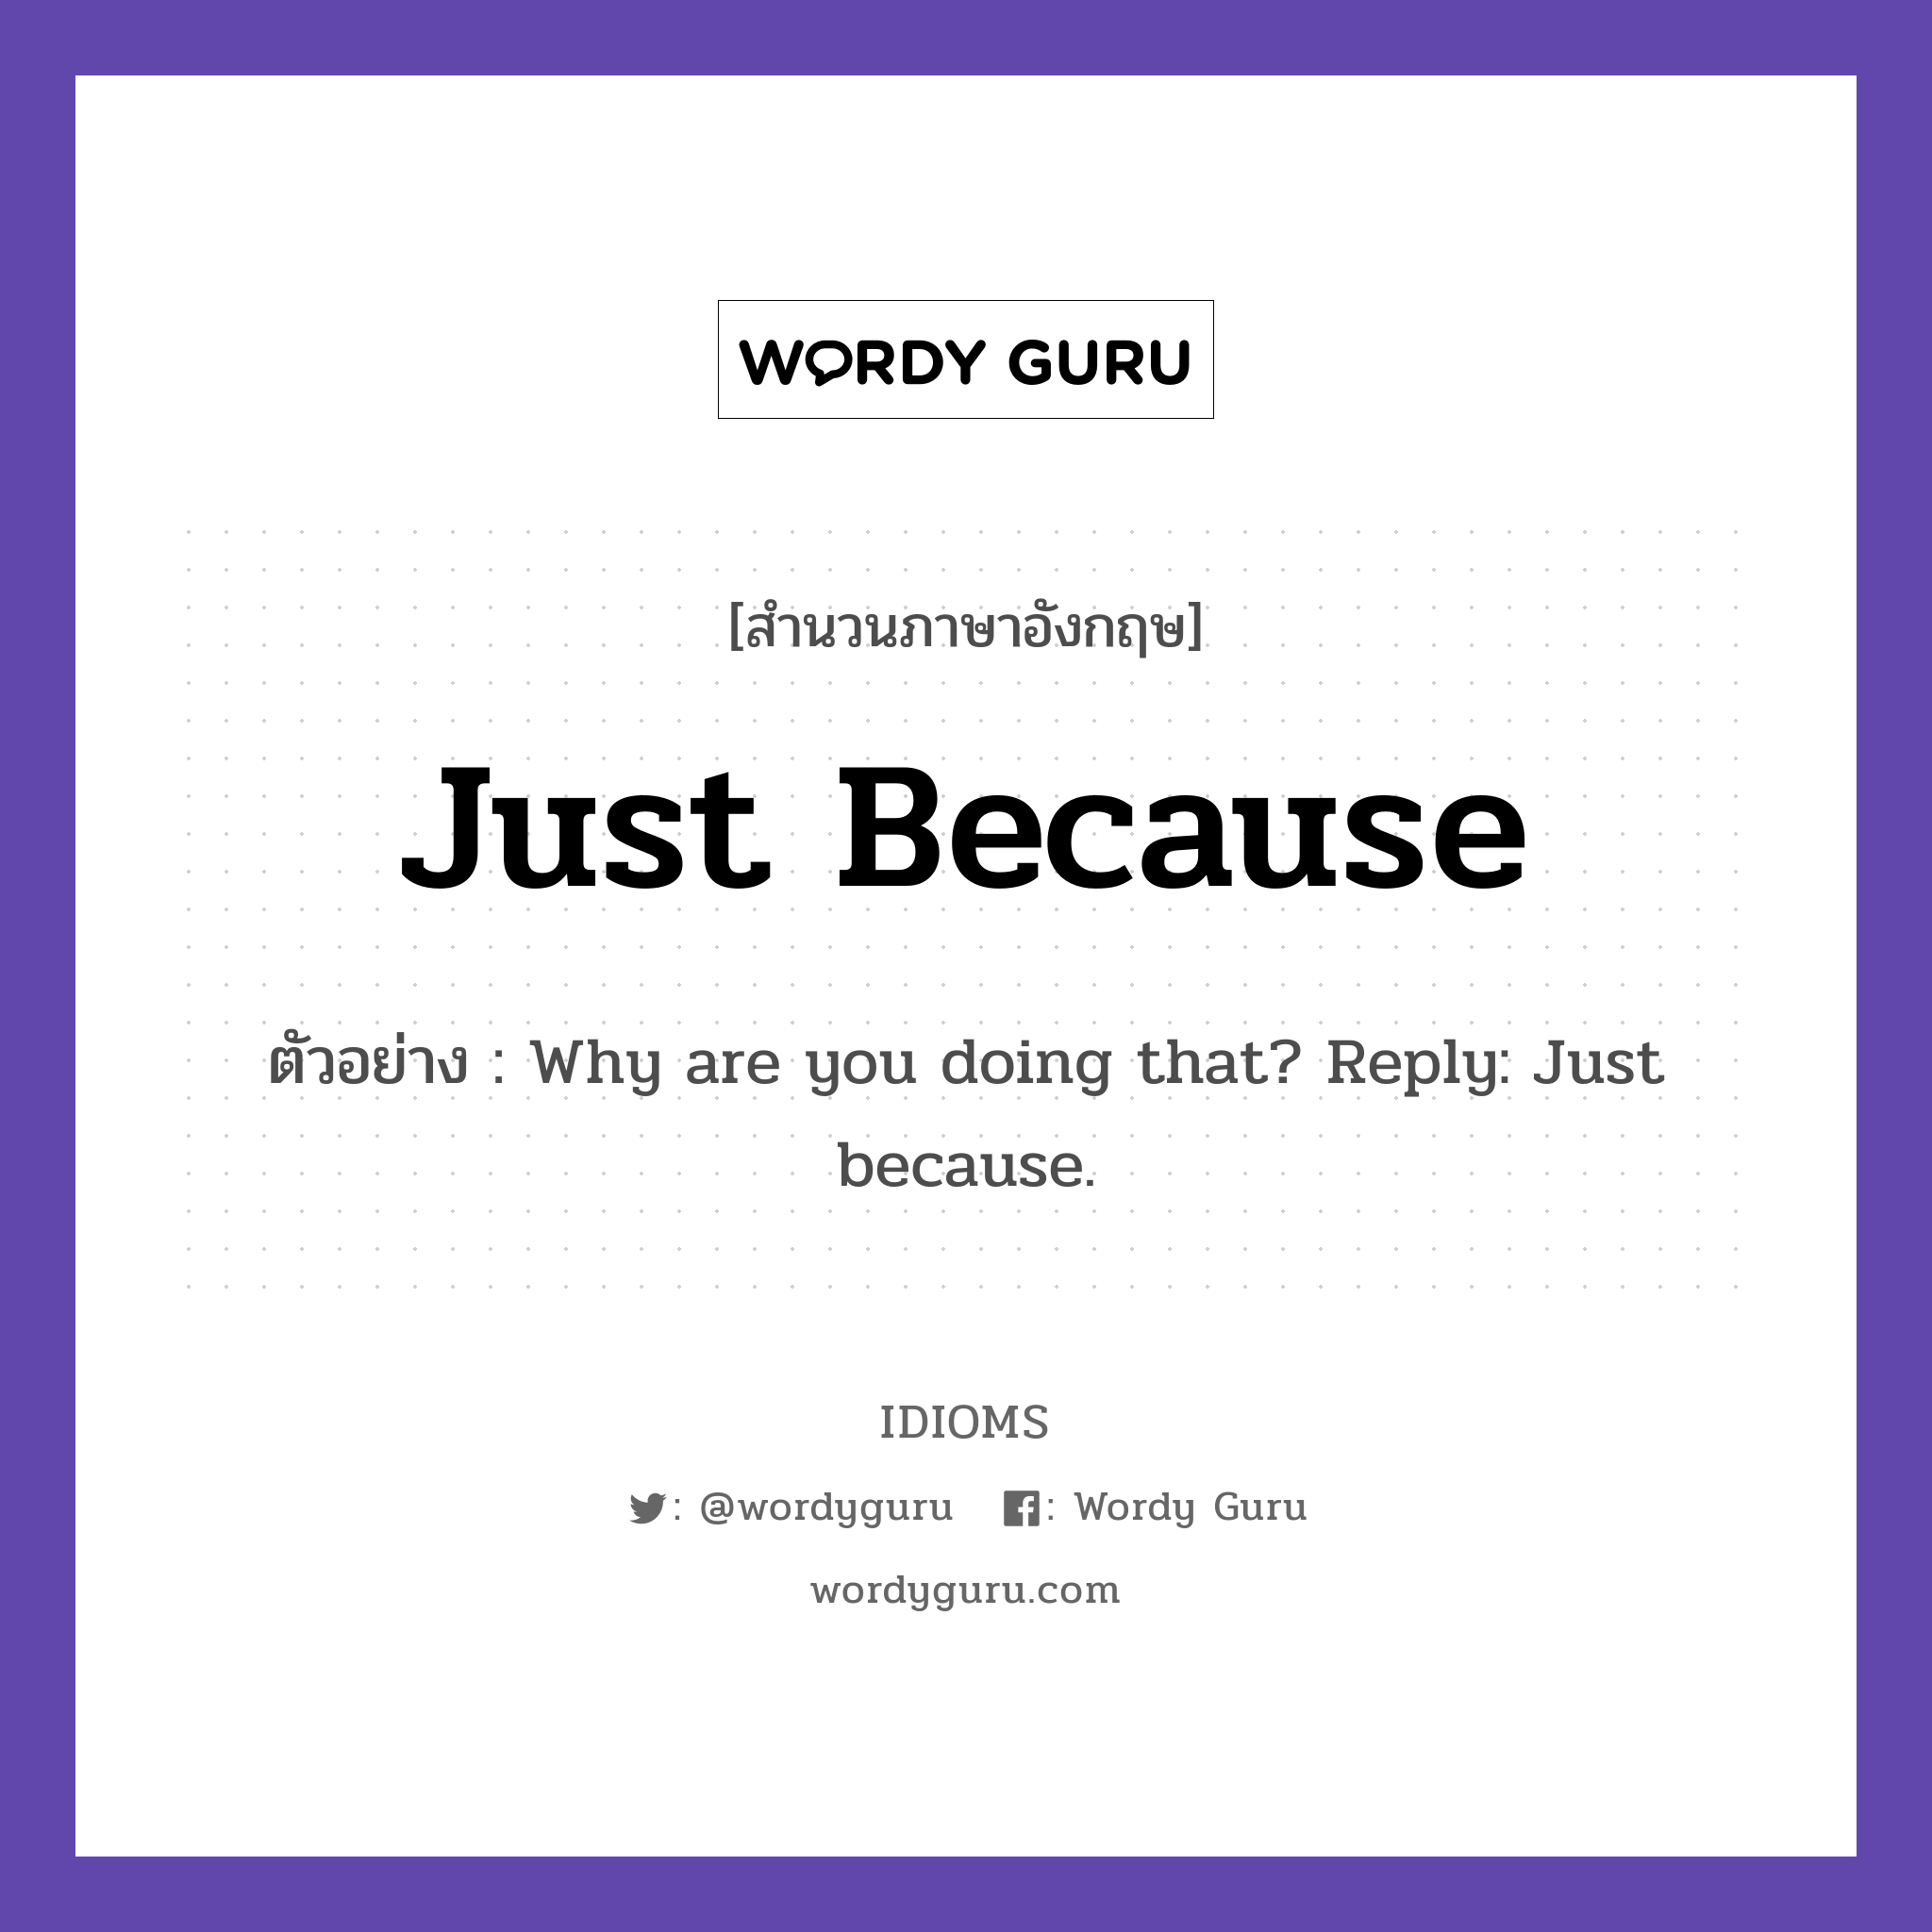 Just Because แปลว่า?, สำนวนภาษาอังกฤษ Just Because ตัวอย่าง Why are you doing that? Reply: Just because.